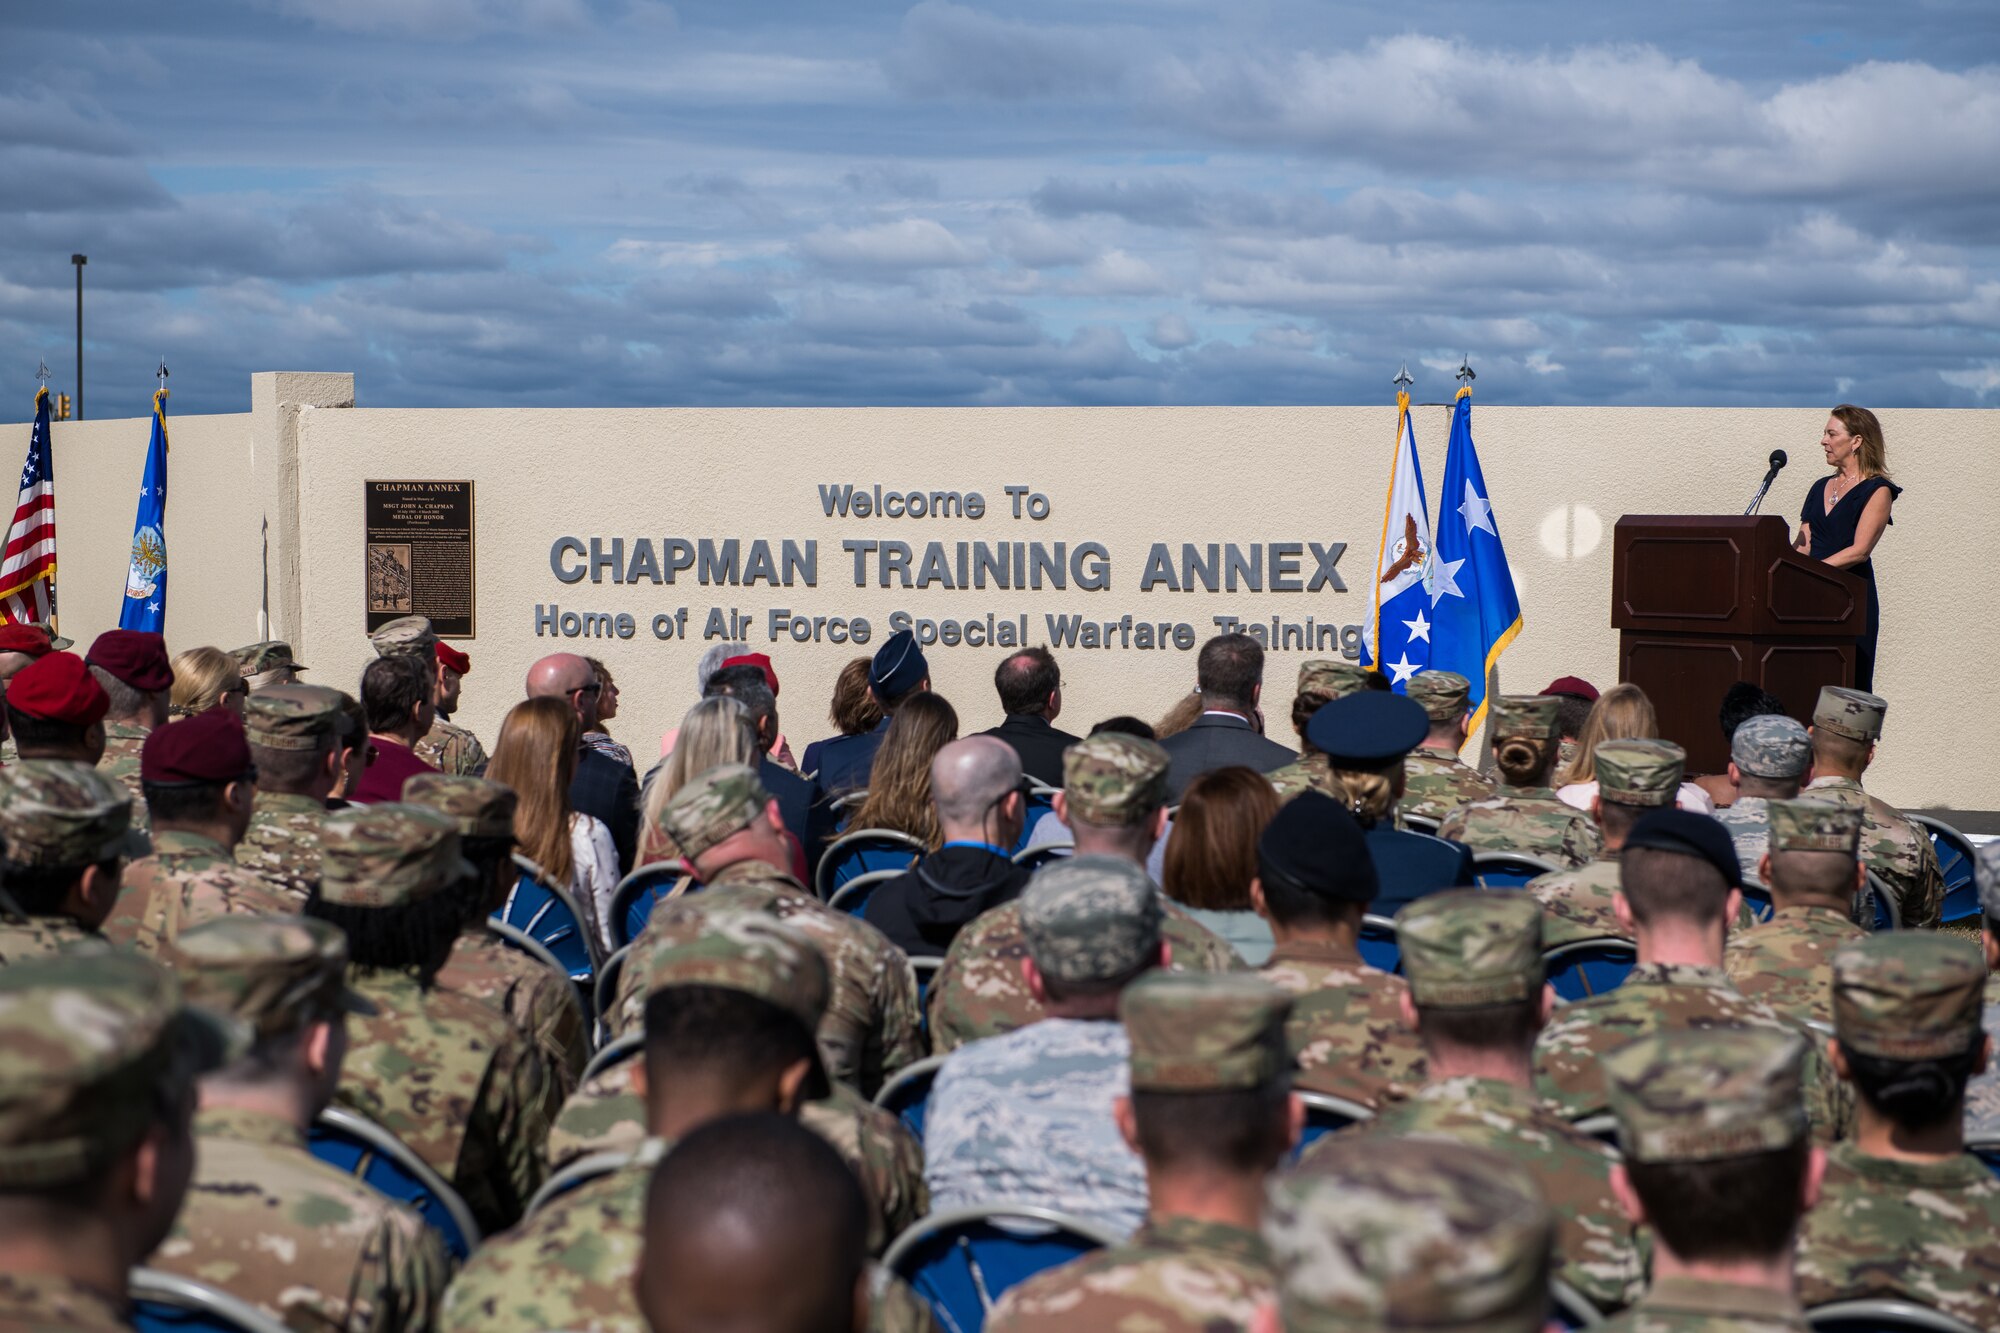 Valerie Nessel, spouse of Master Sgt. John A. Chapman, gives a few words during the Joint Base San Antonio Annex renaming ceremony, March 4, 2020, at Joint Base San Antonio-Chapman Annex, Texas. Joint Base San Antonio-Annex, home of Special Warfare training, is renamed JBSA-Chapman Annex in honor of the service, heroism, and ultimate sacrifice of Master Sgt. John A. Chapman. Chapman was posthumously awarded the Medal of Honor for his action in Takur Ghar, Afghanistan. (U.S. Air Force photo by Sarayuth Pinthong)